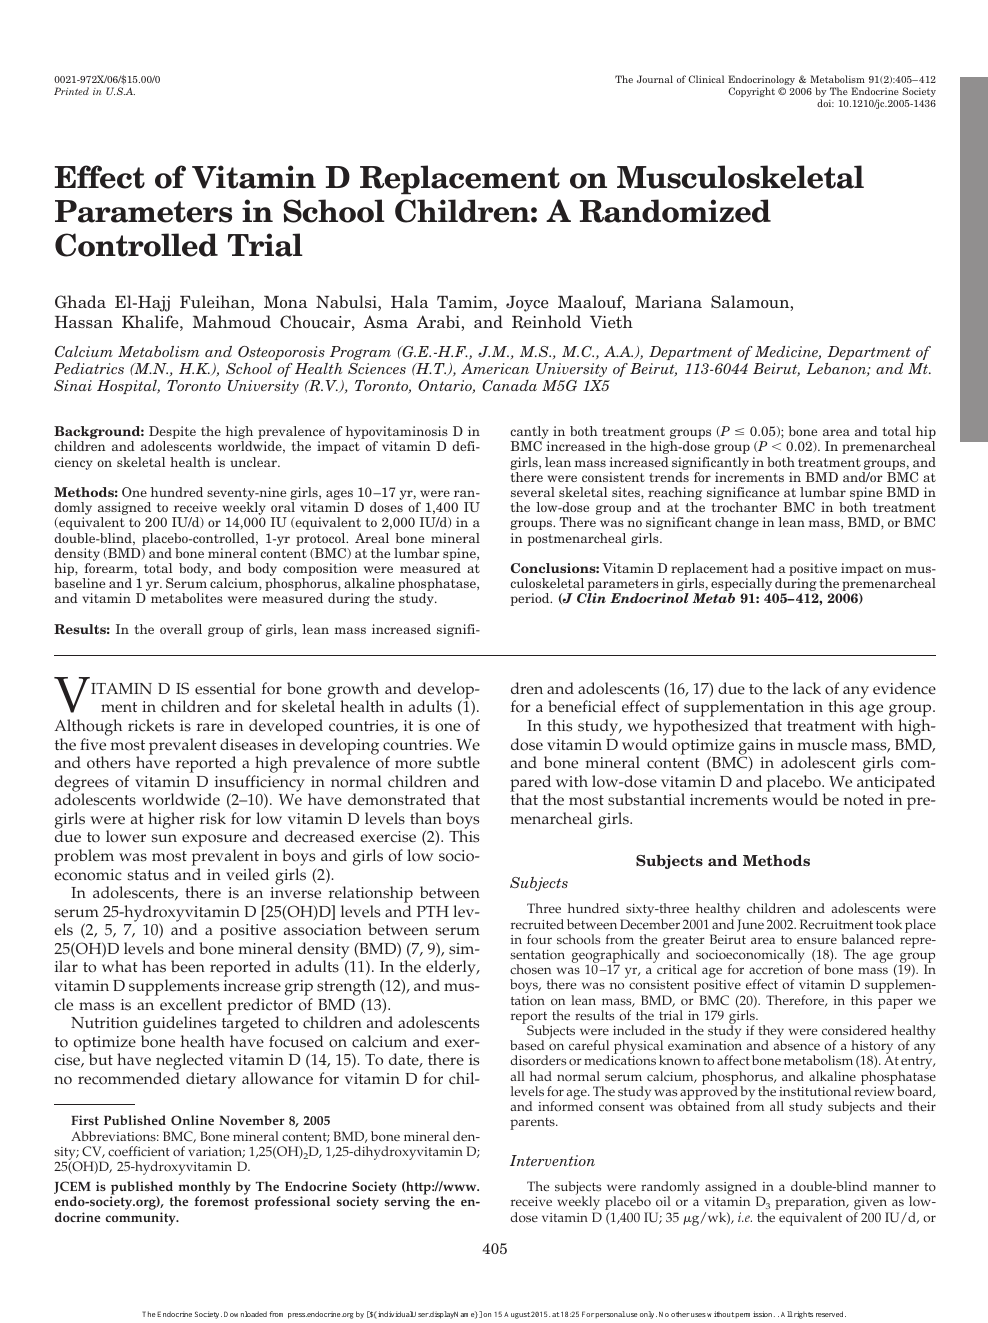 Effect Of Vitamin D Replacement On Musculoskeletal Parameters In School Children A Randomized Controlled Trial Topic Of Research Paper In Clinical Medicine Download Scholarly Article Pdf And Read For Free On